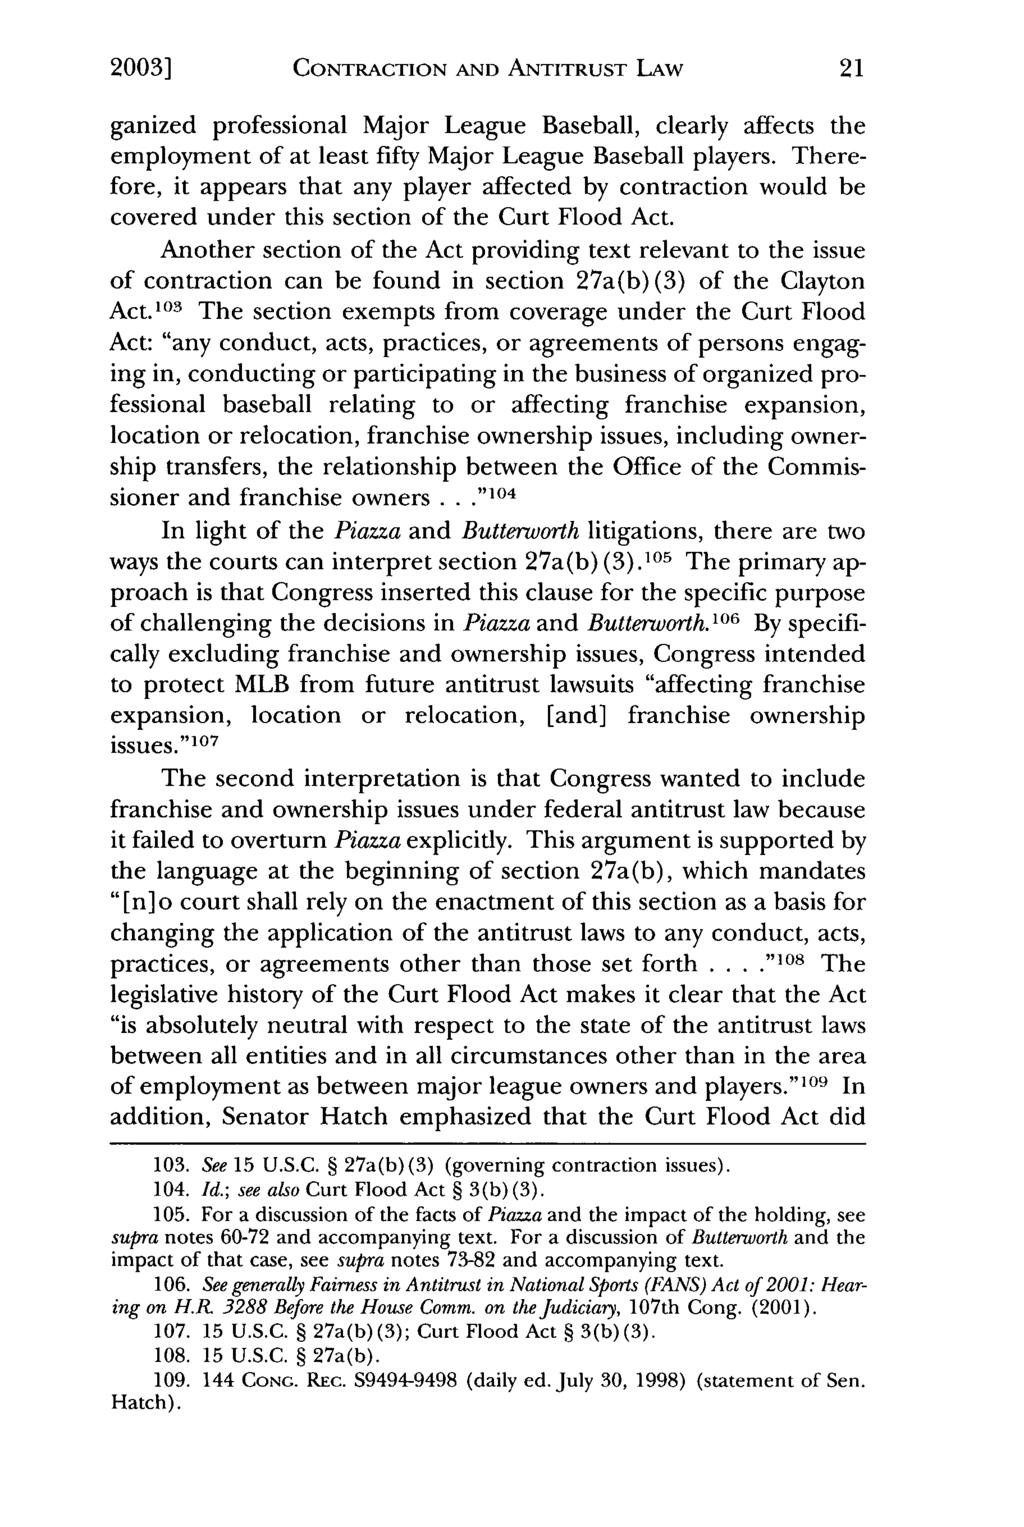 2003] Wolohan: Major League Baseball Contraction and Antitrust Law CONTRACTION AND ANTITRUST LAw ganized professional Major League Baseball, clearly affects the employment of at least fifty Major